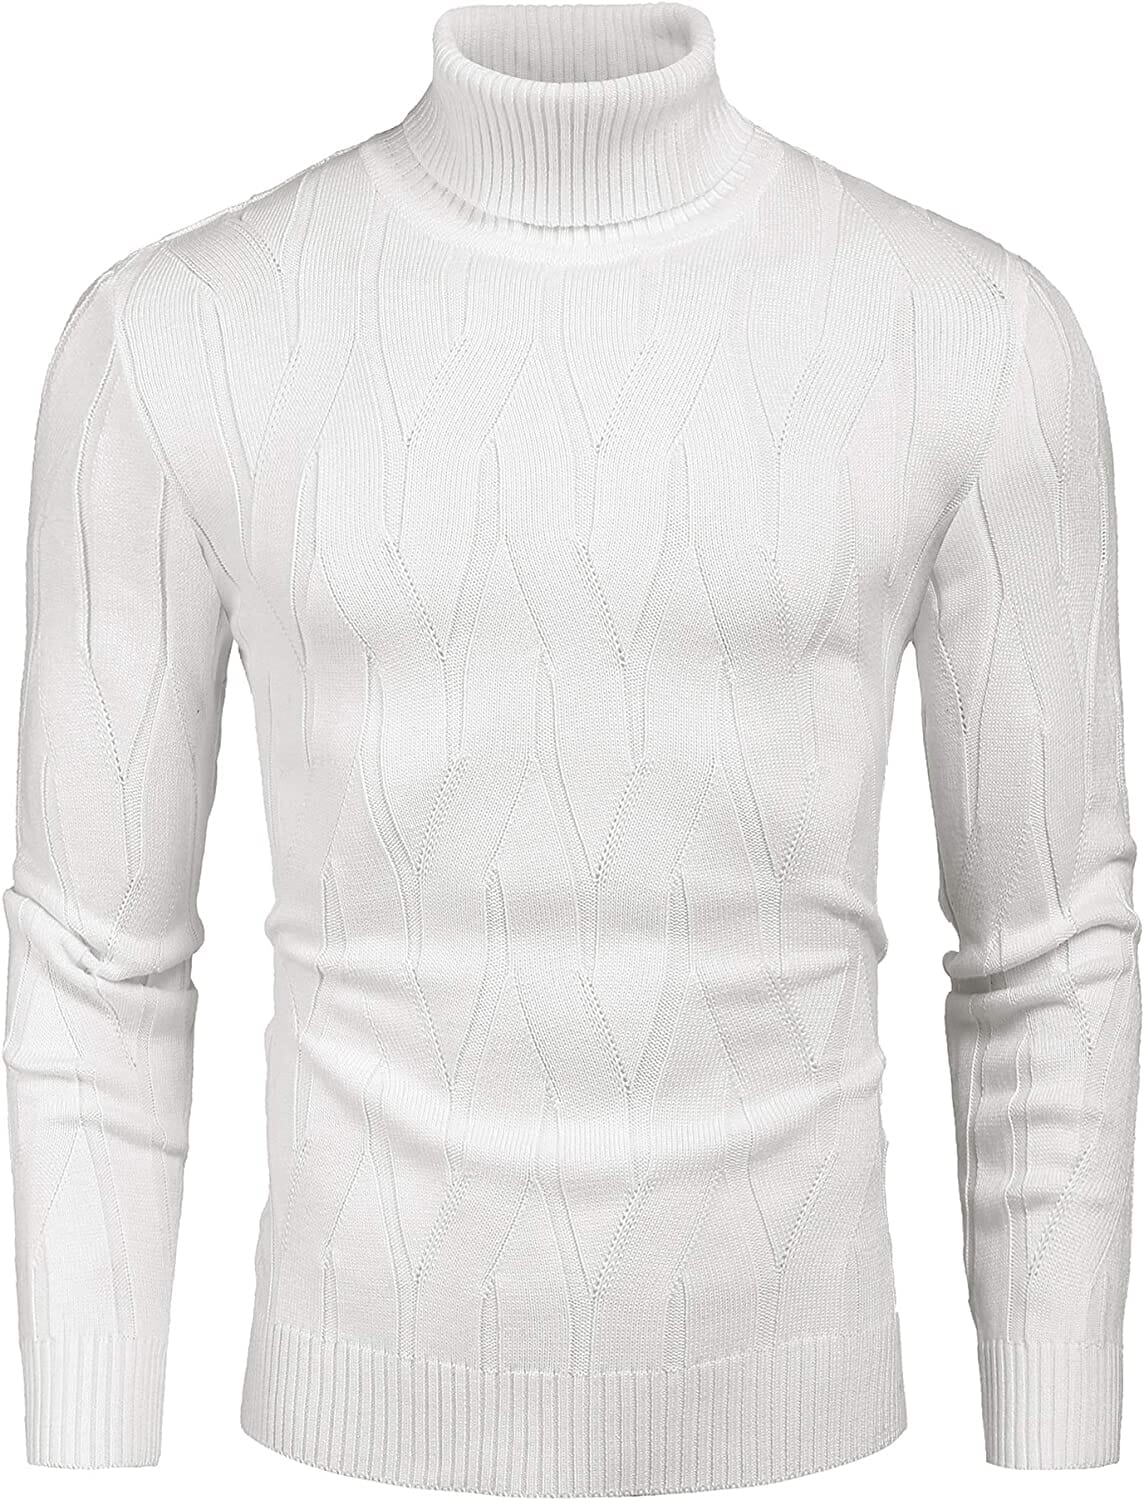 Slim Fit Turtleneck Knitted Pullover Sweaters (US Only) Sweaters Coofandy's White S 